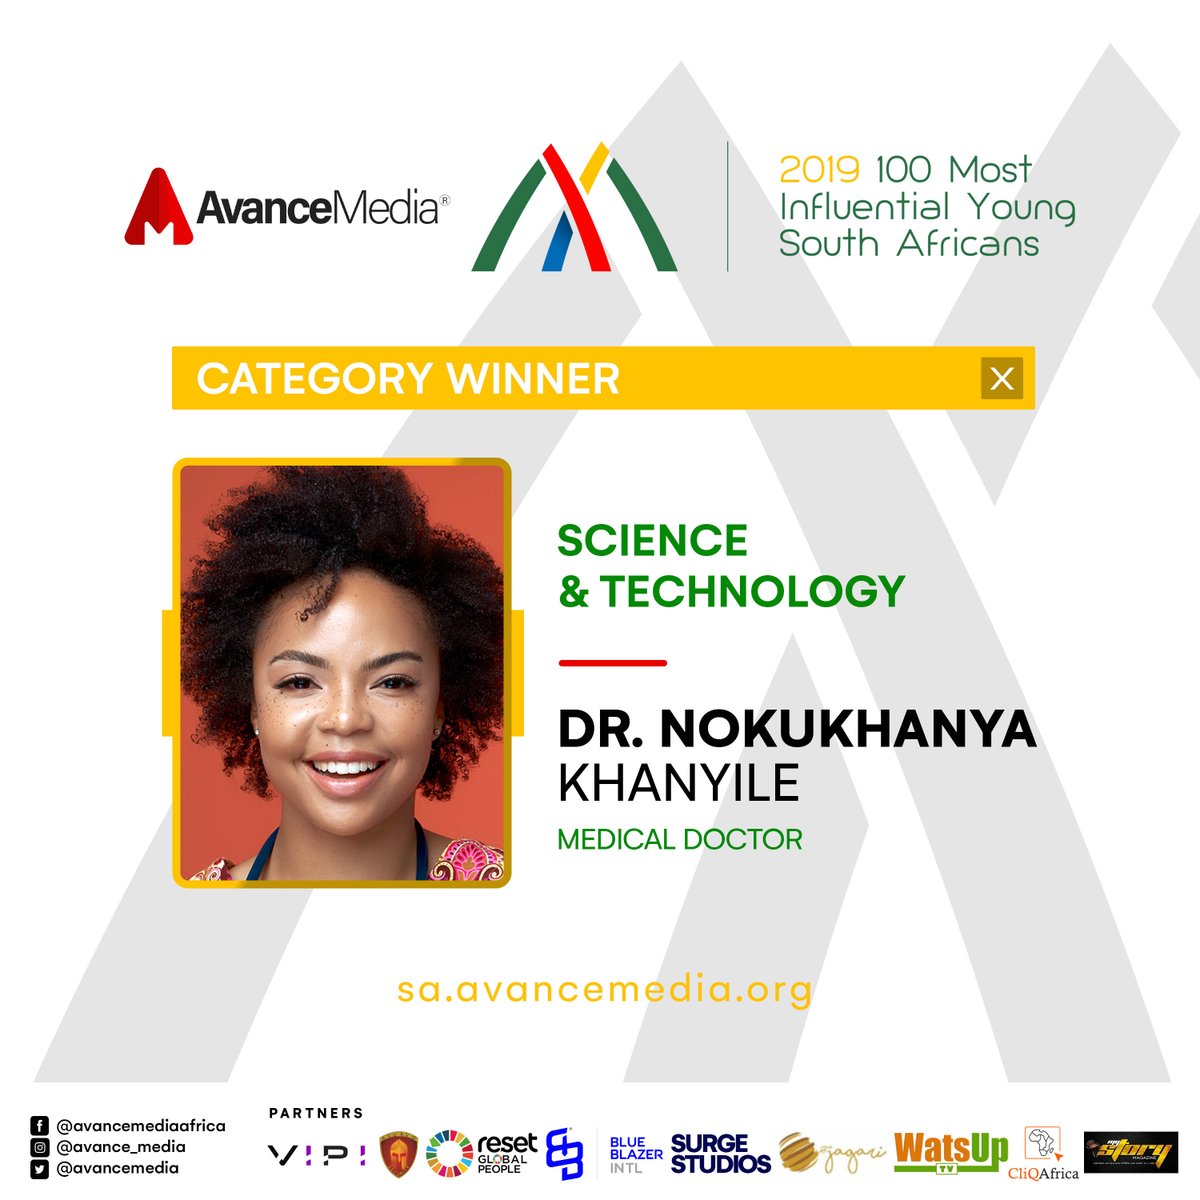 Congratulations to @dr_khanyile on being voted the 2019 Most Influential Young South African  in Science & Technology

Full ranking available on sa.avancemedia.org

Profile available on avancemedia.org/2019miysa

#100MIYSA #AvanceMedia #SouthAfrica

cc: @mentalmatters_